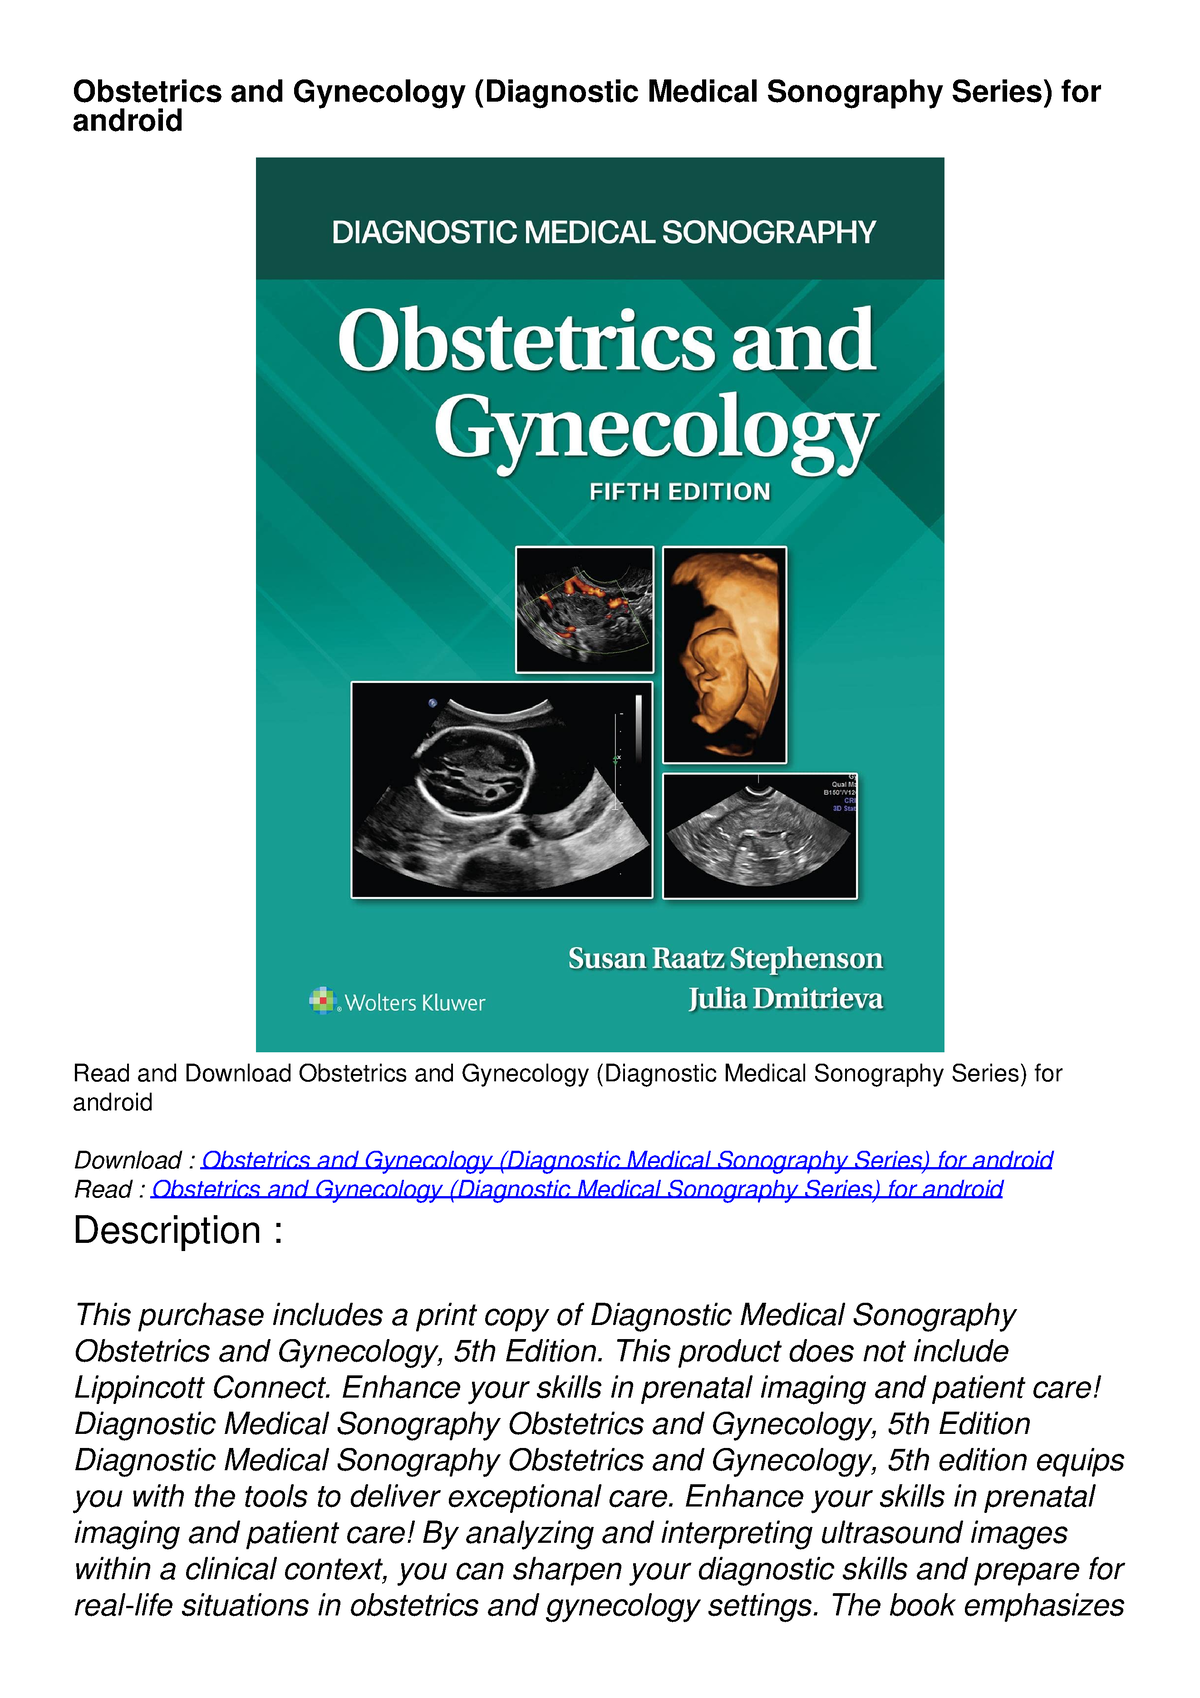 Ebook Obstetrics And Gynecology Diagnostic Medical Sonography Series For Andro This Product